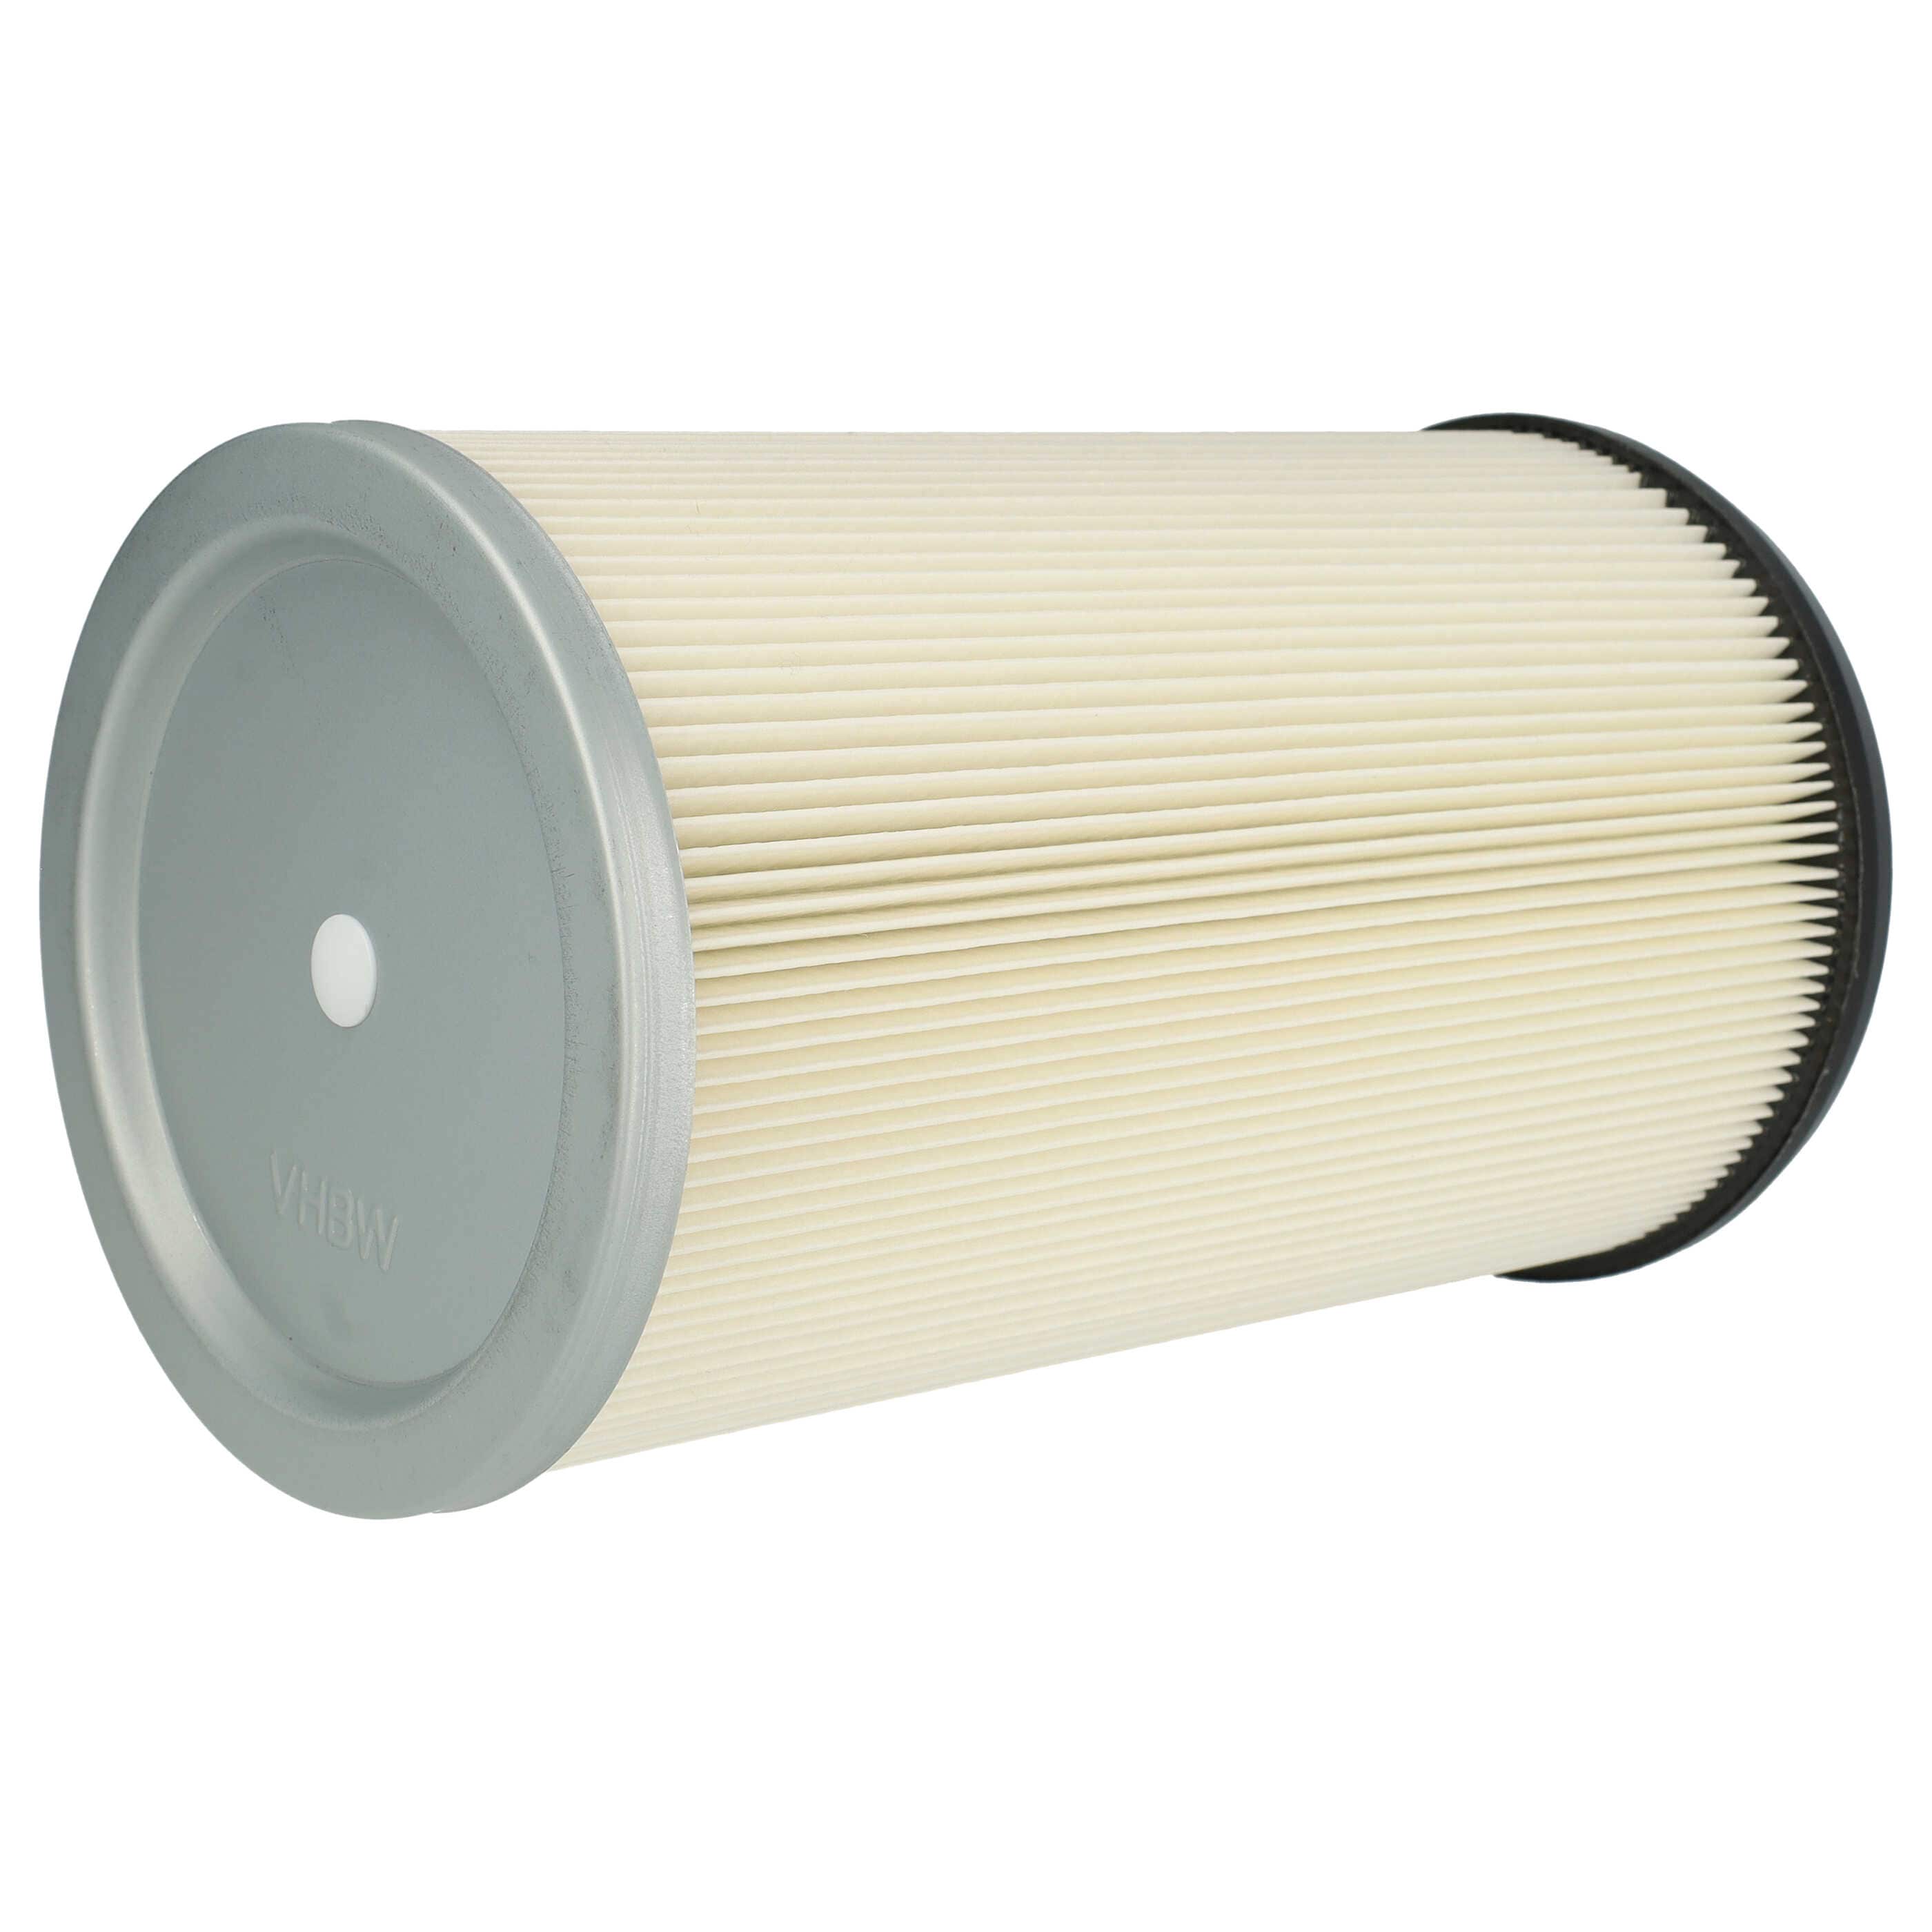 1x cartridge filter replaces Kärcher 57310070, 5.731-007.0 for Kärcher Vacuum Cleaner, white / silver / blue